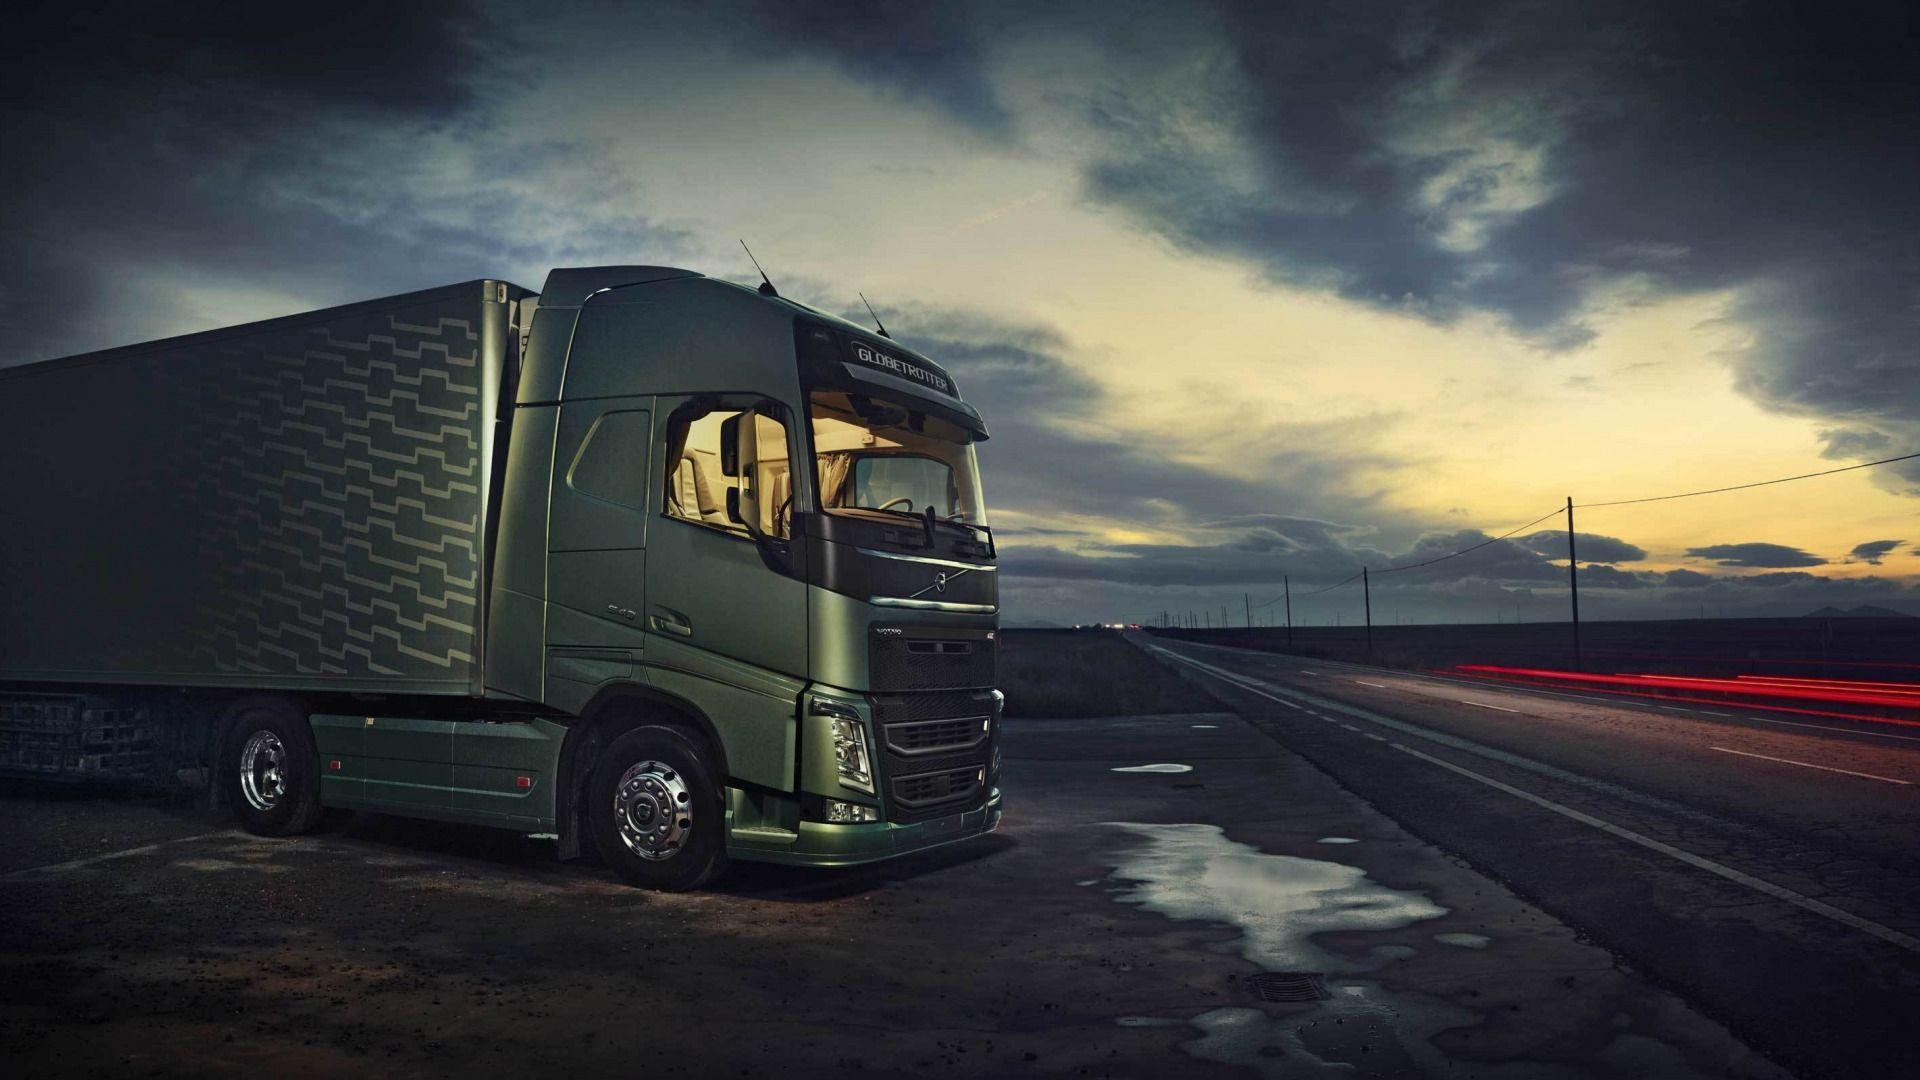 Euro Truck Simulator 2 HD Wallpaper and Background Image